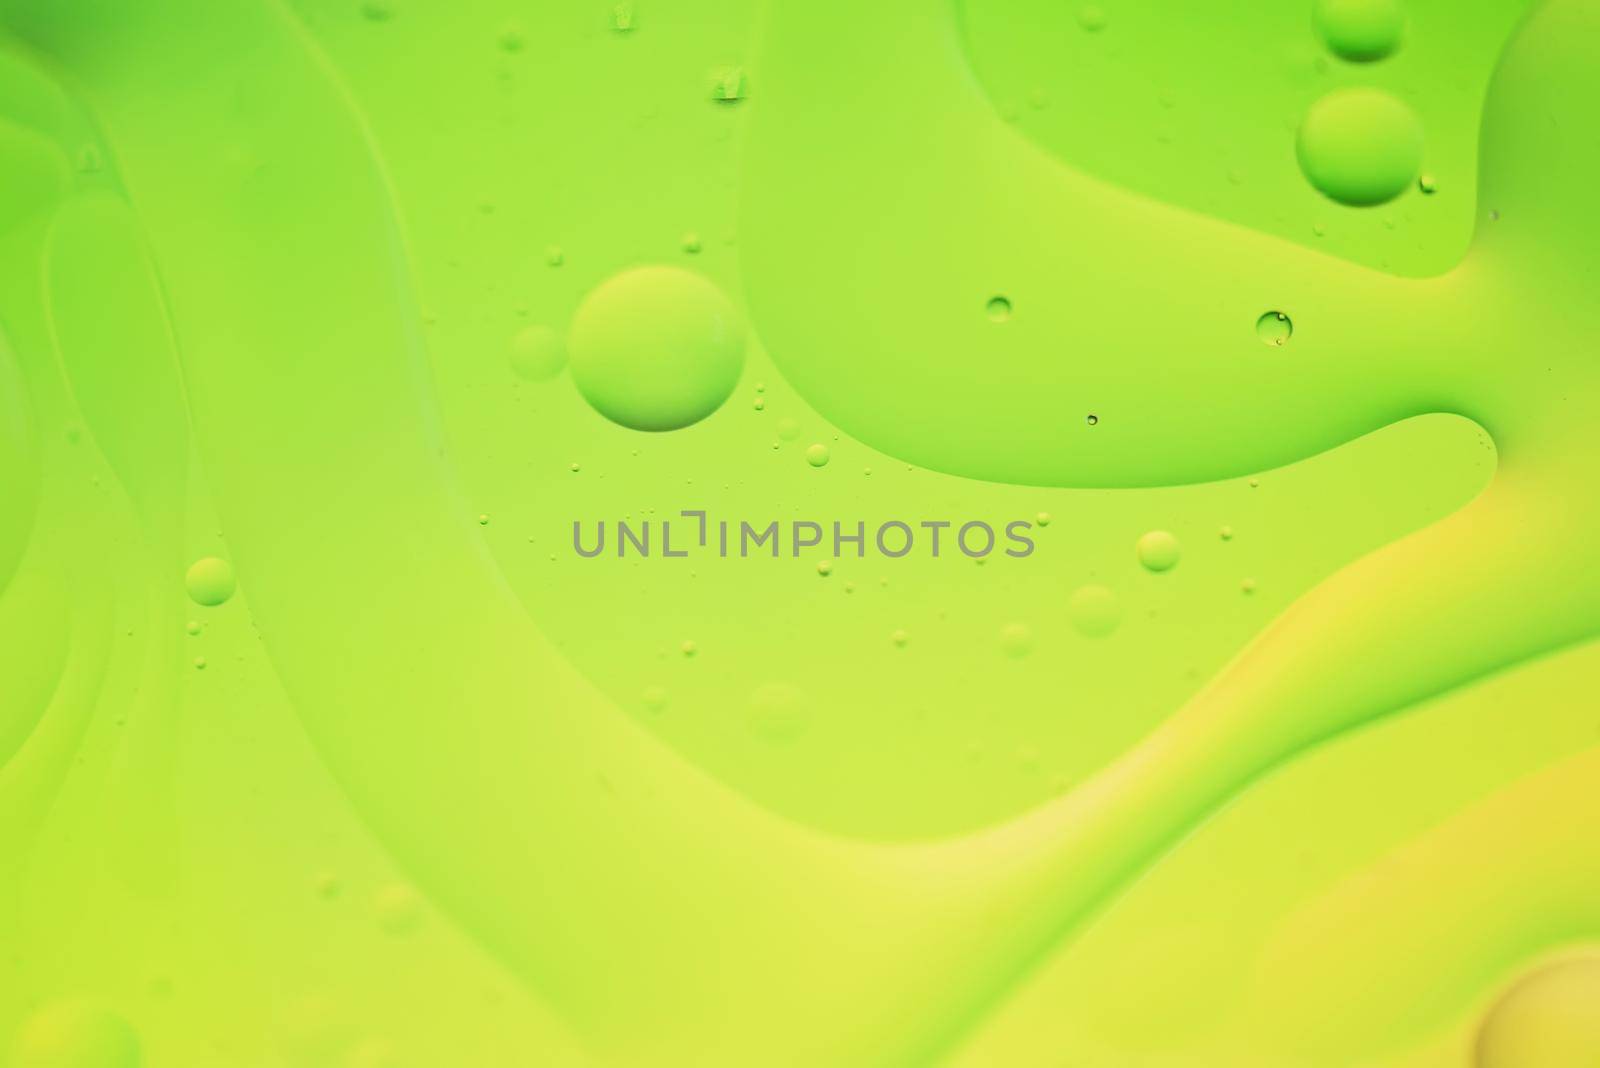 Green and yellow abstract background picture made with oil, water and soap by anytka